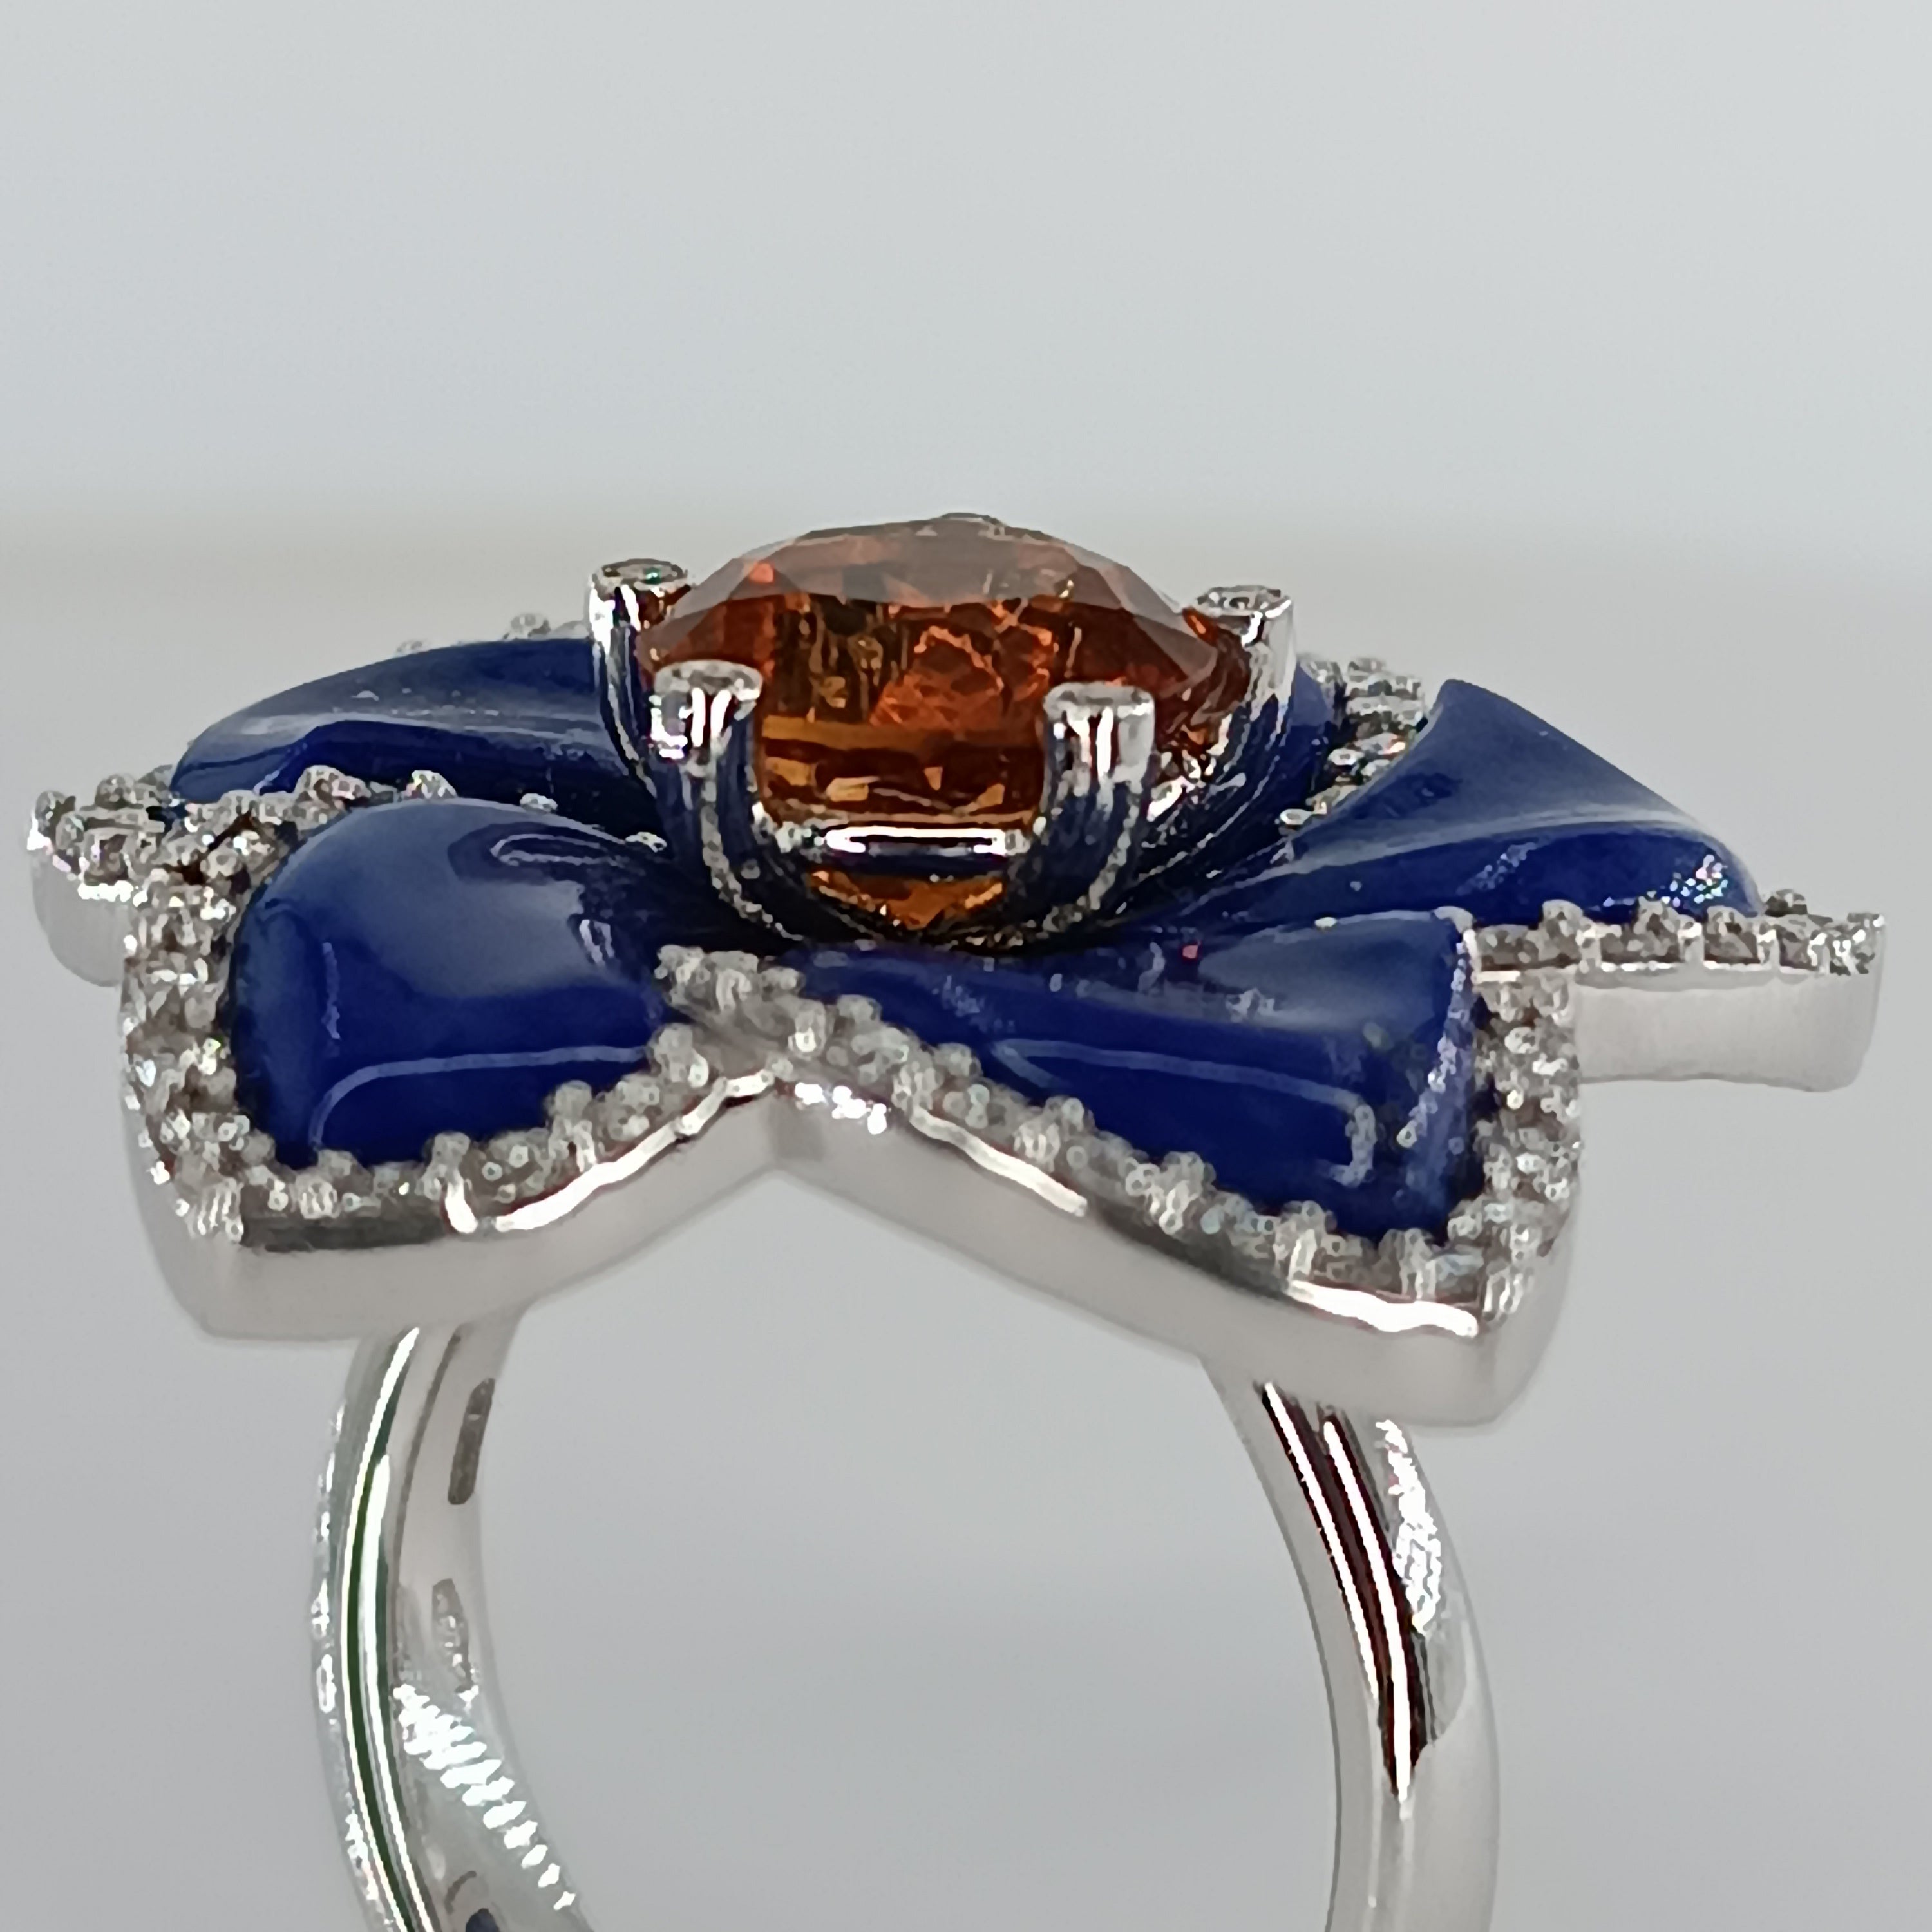 18 carat withe gold ring with lapis petals  and round faceted citrine stone  Carat. 1,96 surrounded by brilliant cut diamonds with a Total weight of Carat 0.78, color G, clarity VS 1. total gross weight gr. 12,43 ring size 54
any item of our jewelry